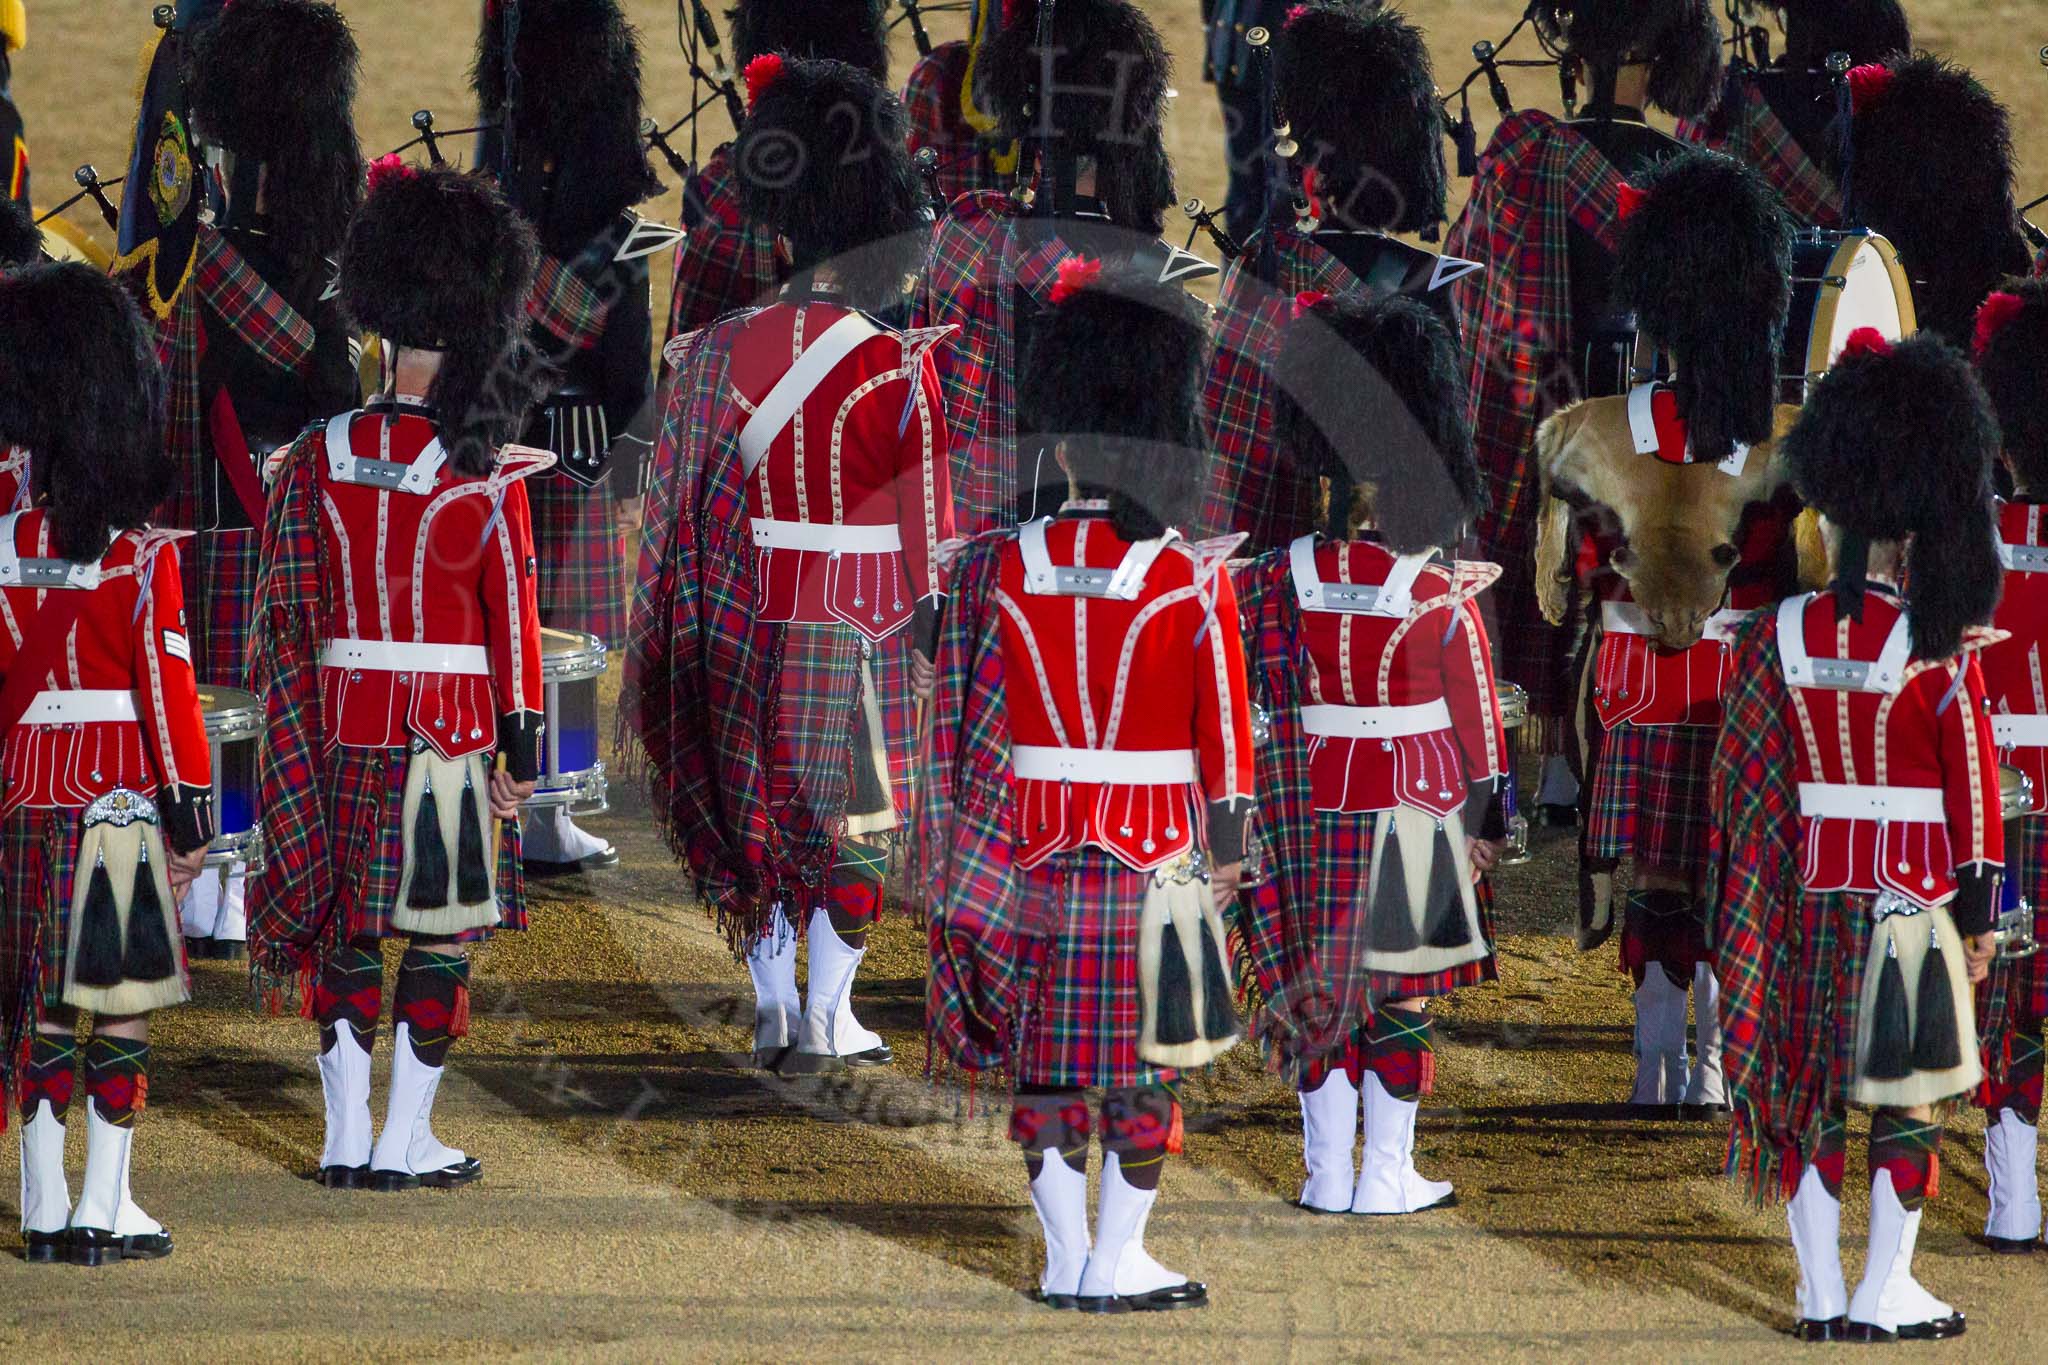 Beating Retreat 2014.
Horse Guards Parade, Westminster,
London SW1A,

United Kingdom,
on 11 June 2014 at 21:49, image #400